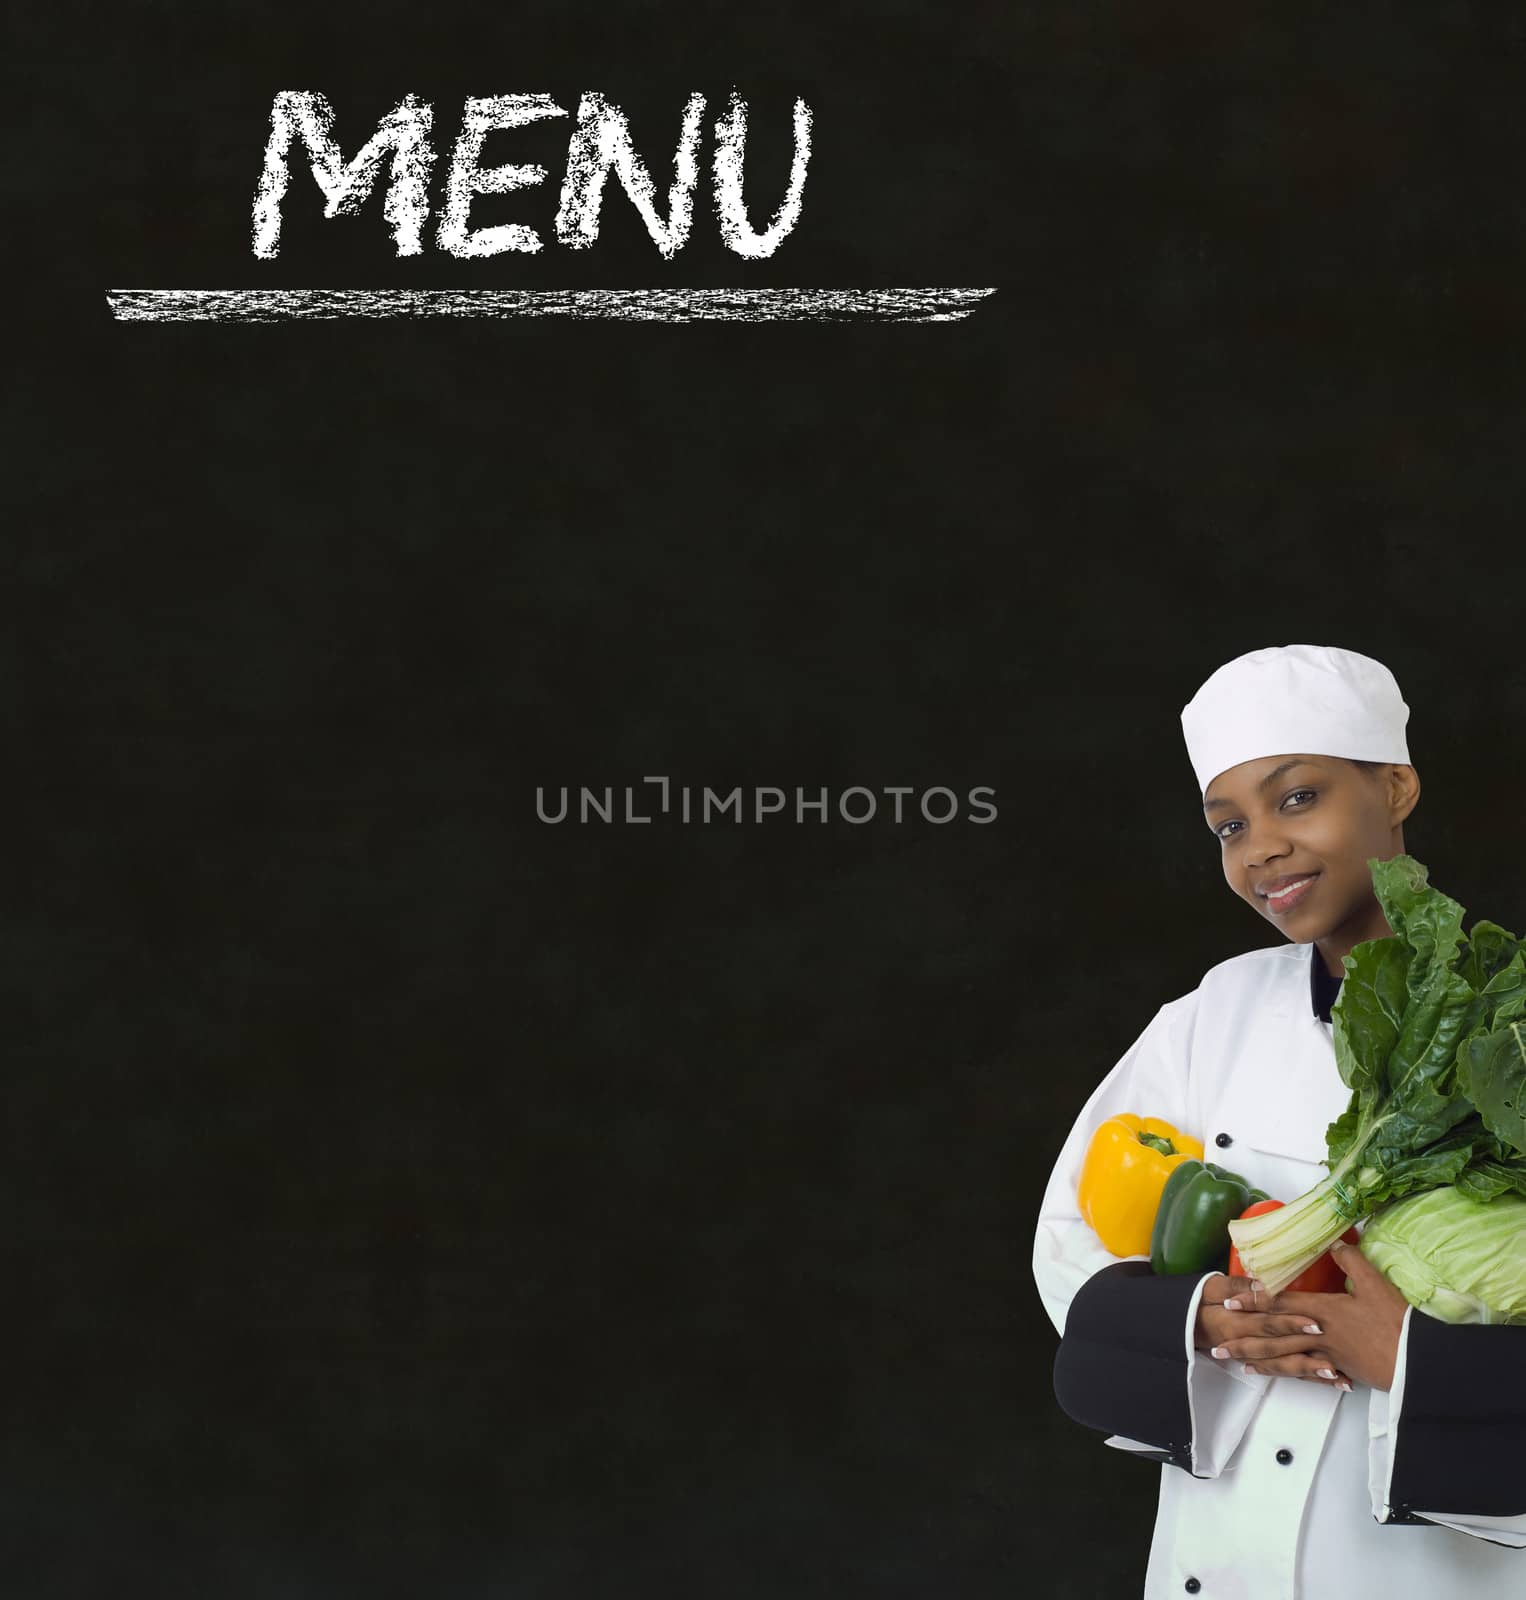 Chef with chalk menu sign on a blackboard background by alistaircotton